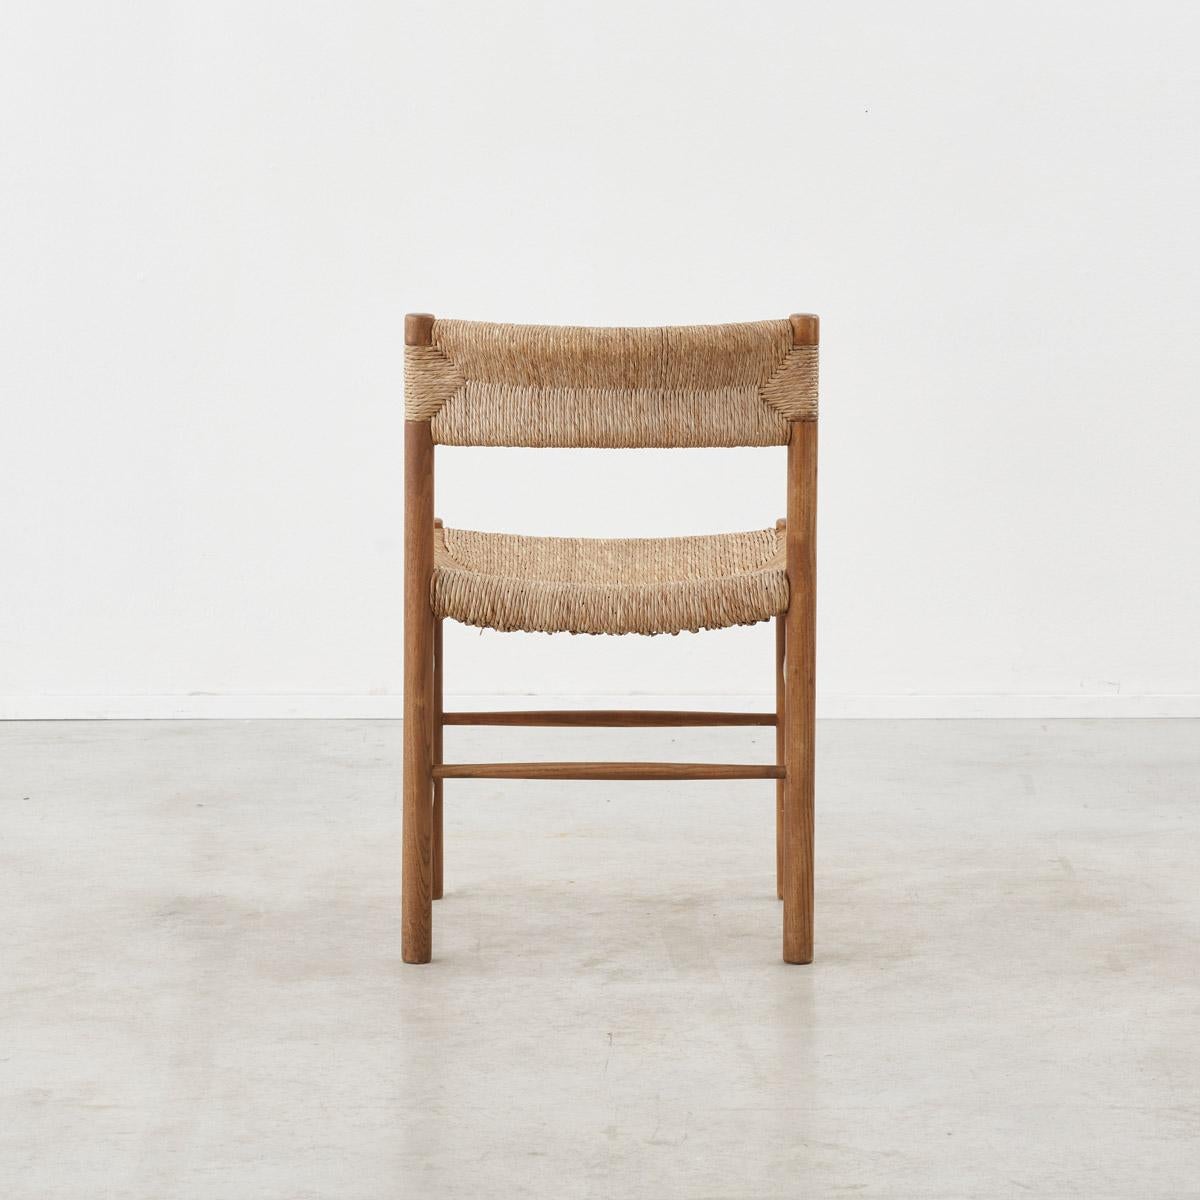 Woven Pair of Charlotte Perriand Dordogne Chairs for Robert Sentou, France c1950 For Sale